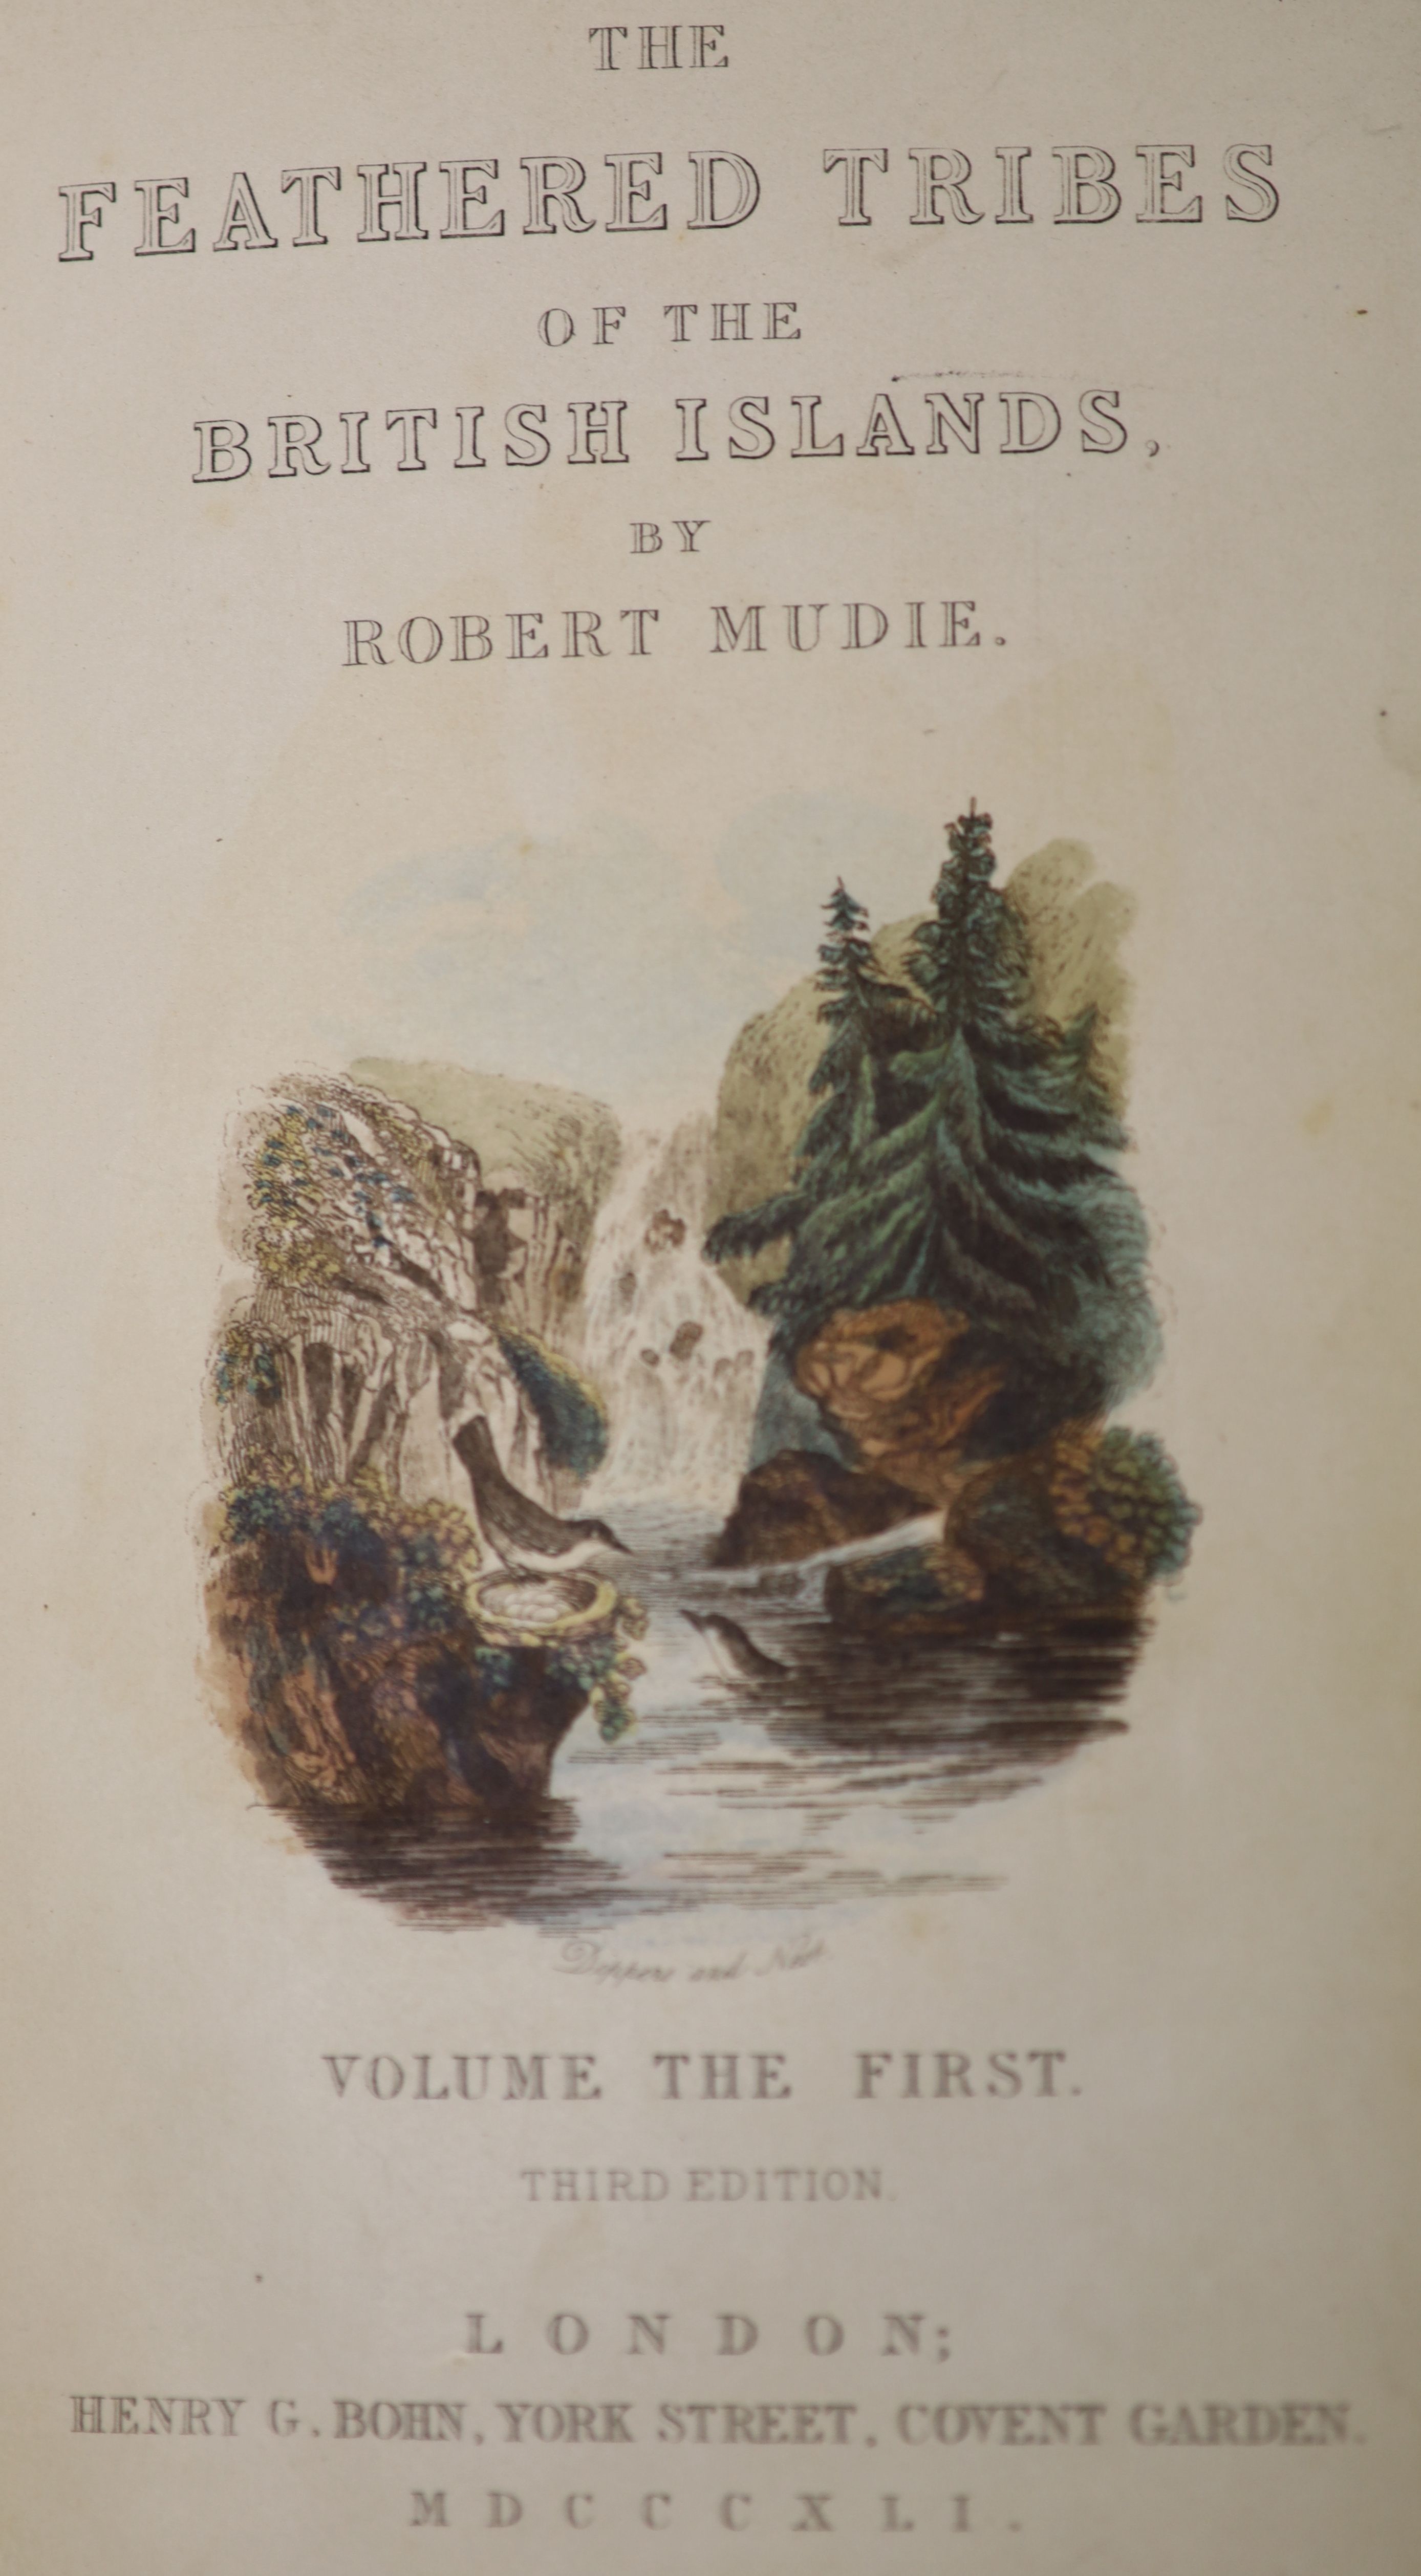 Mudie, Robert - The Feathered Tribes of the British Isles, 3rd edition, 2 vols, with frontispieces and 28 hand-coloured plates, Henry Bonn, London, 1841